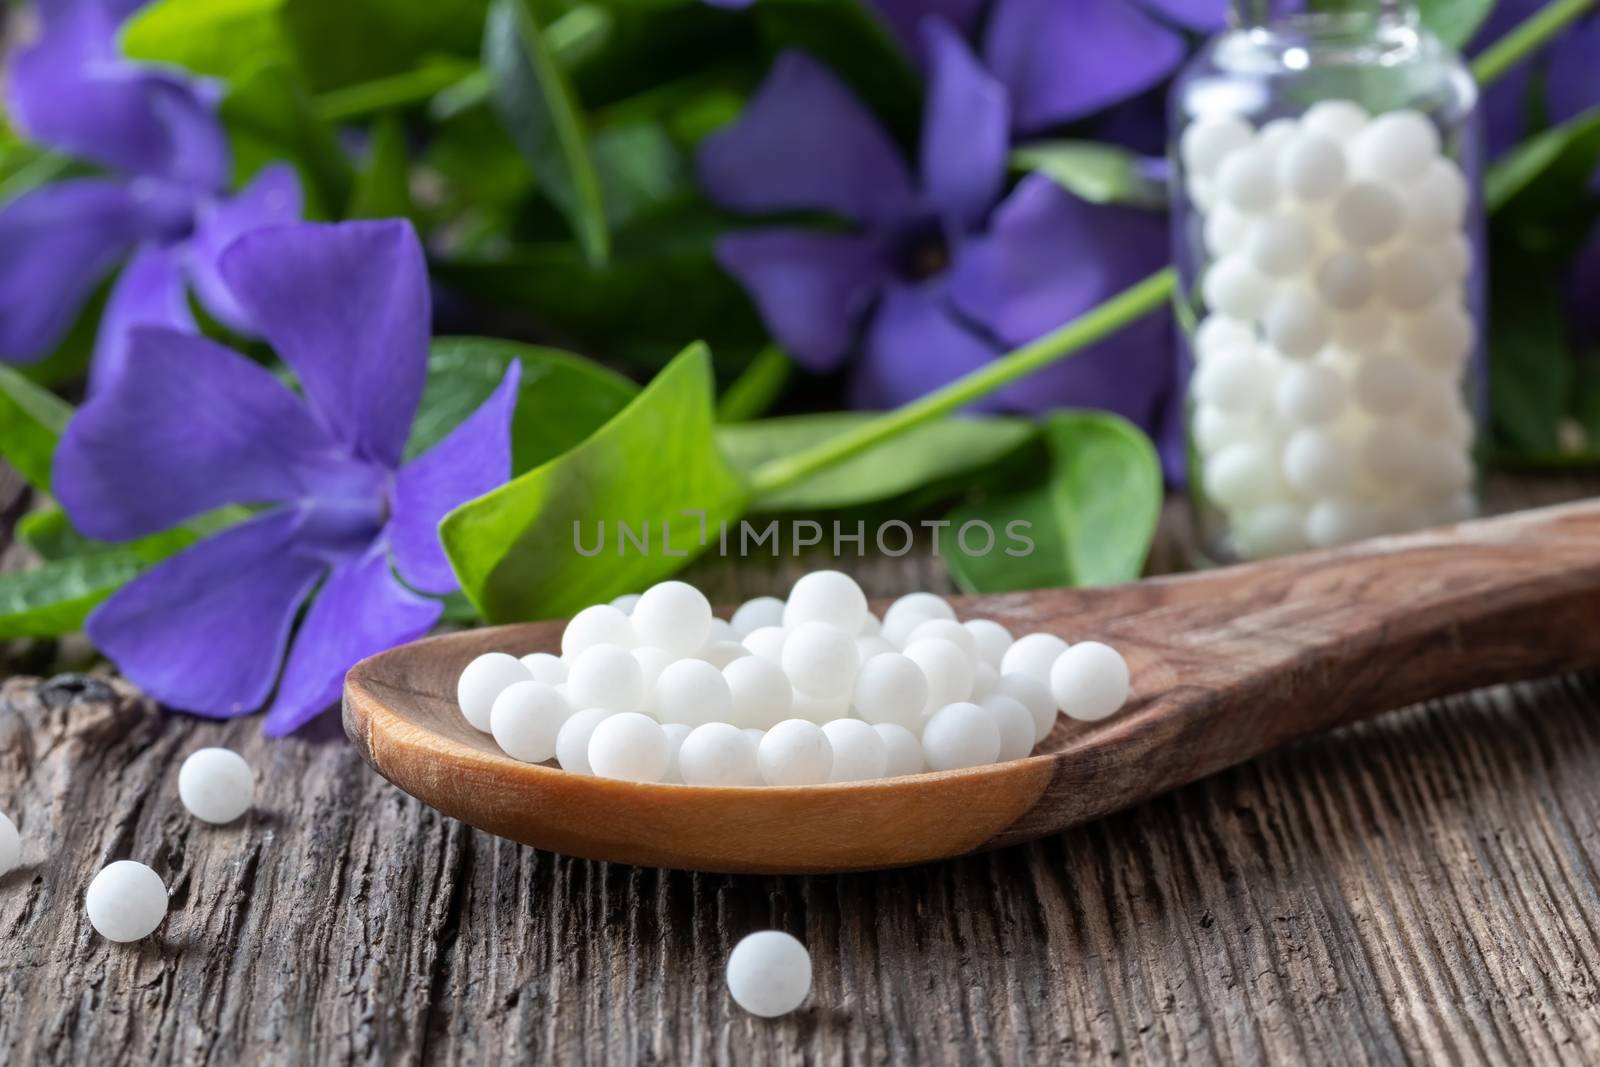 Homeopathic pills on a spoon and Vinca minor plant by madeleine_steinbach